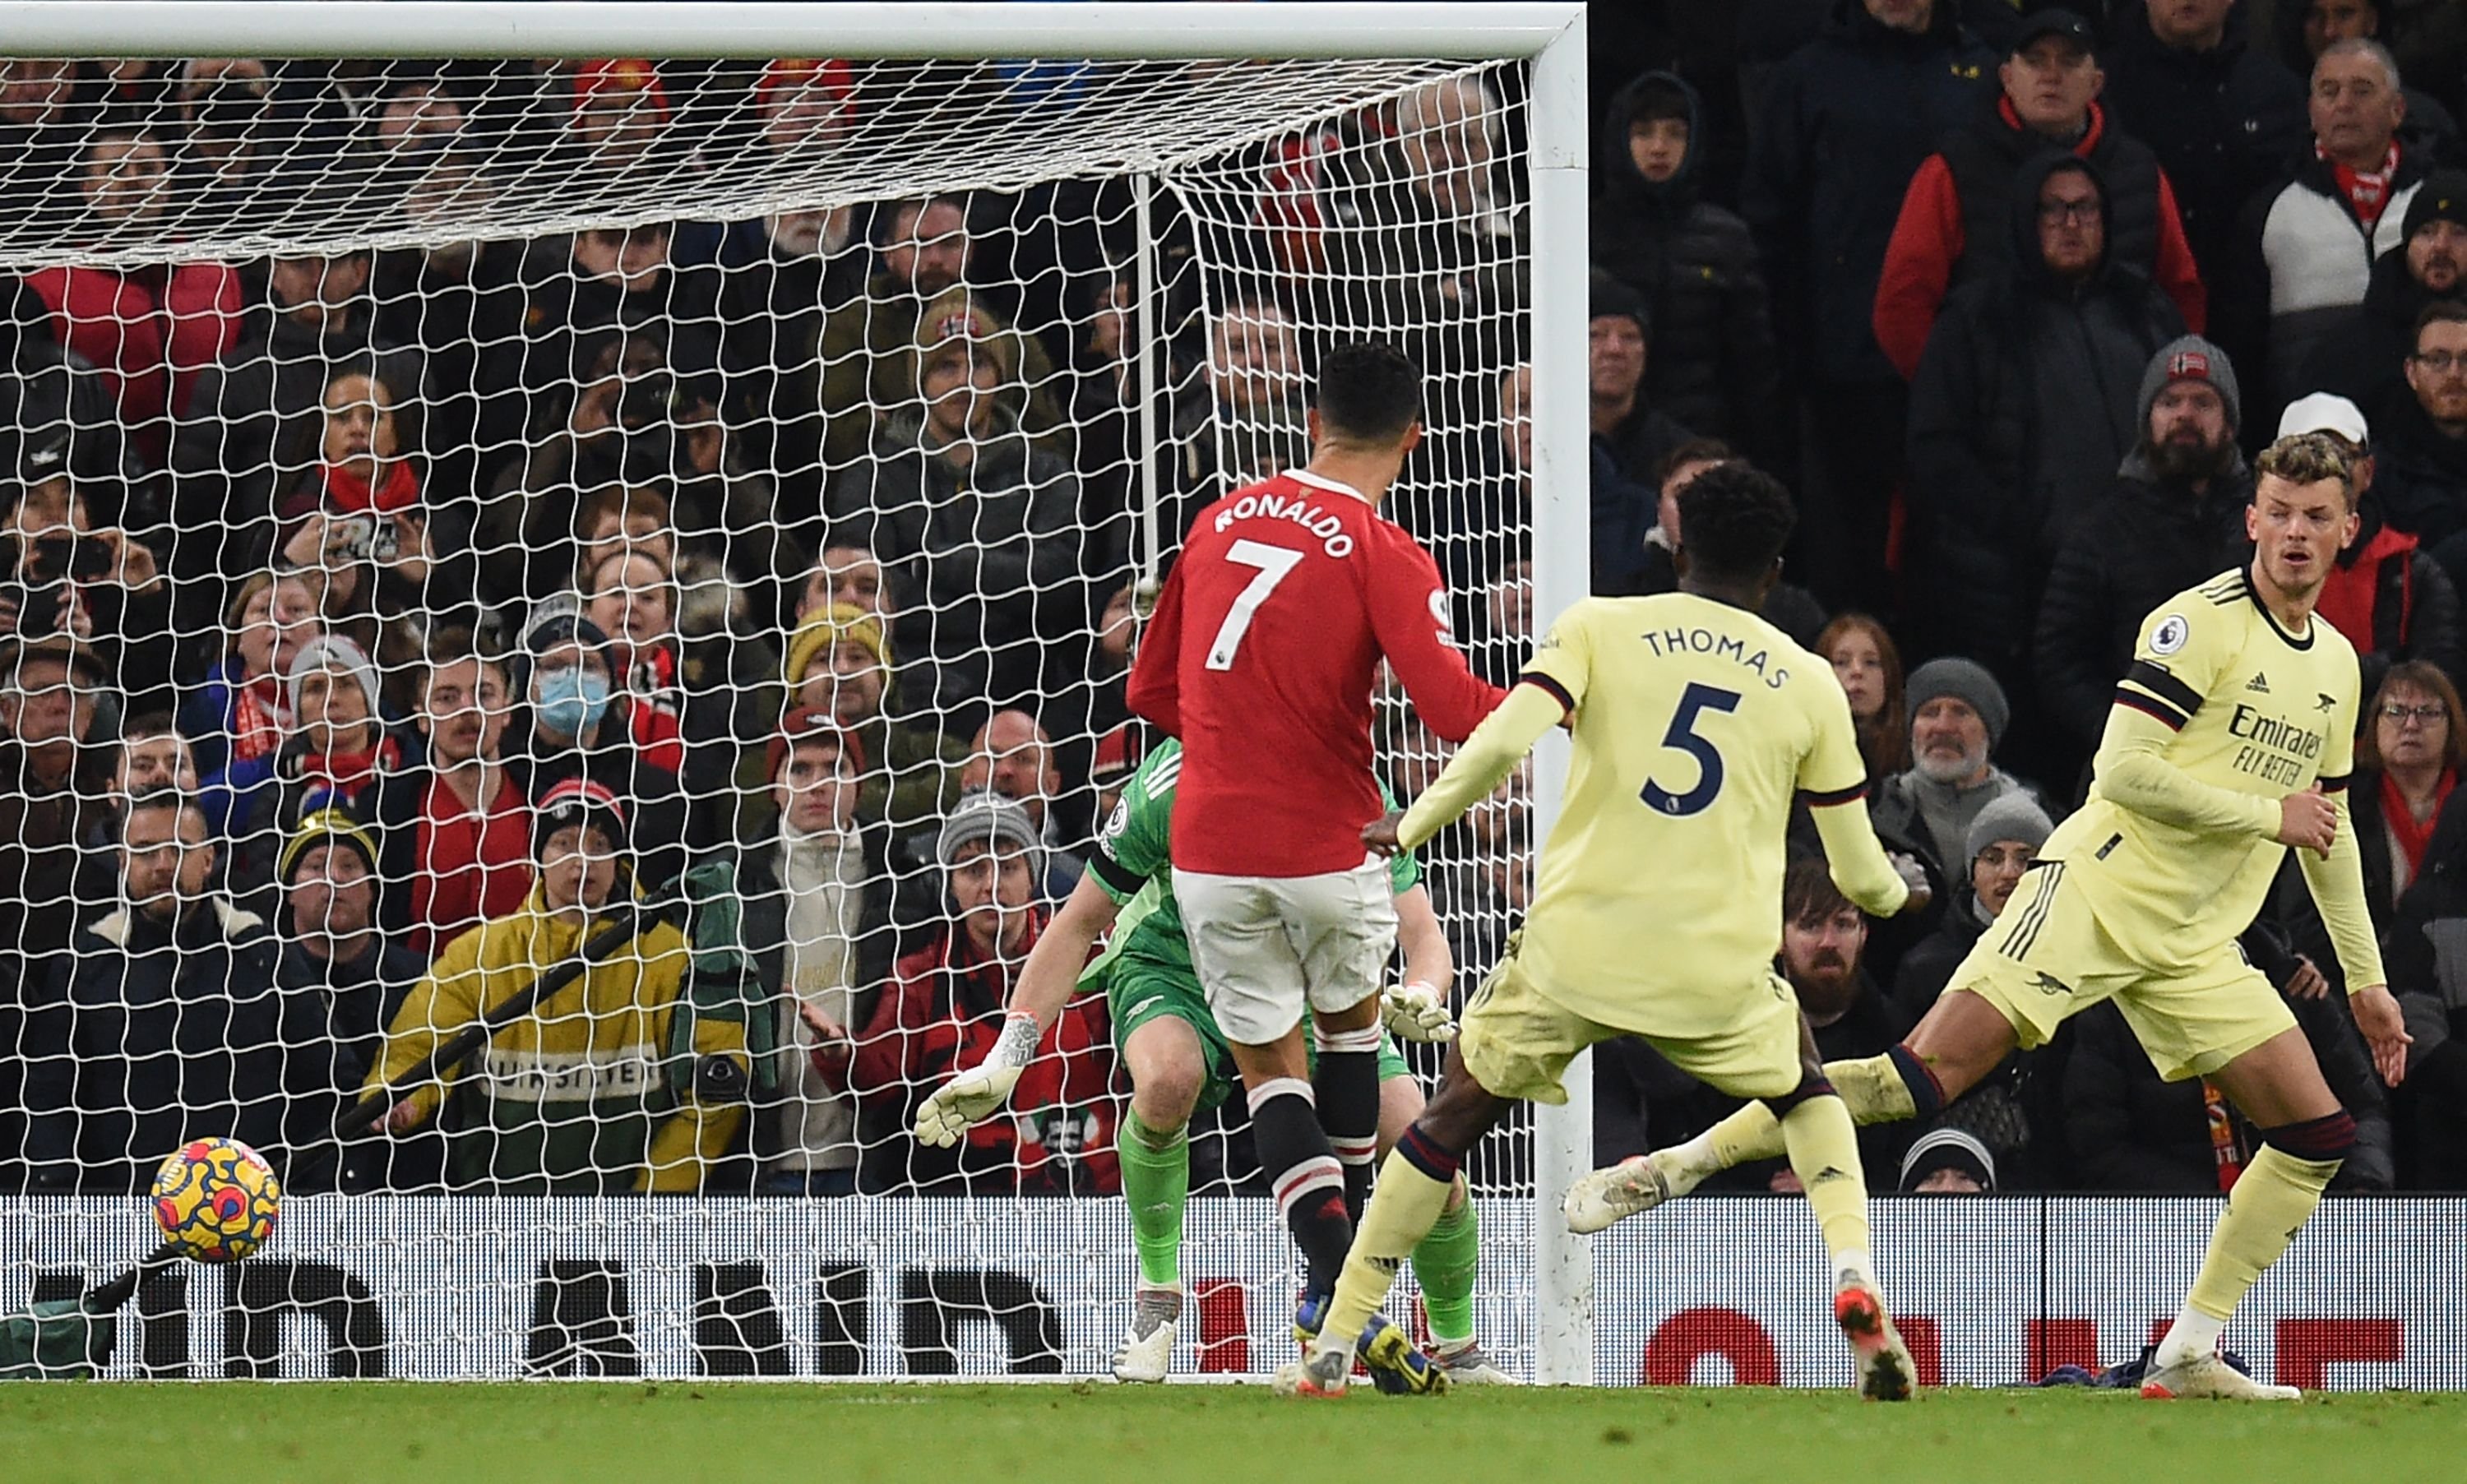 Manchester United's Portuguese striker Cristiano Ronaldo (C) shoots to score the team's second goal, his 800th for the club and the country in his career, during the English Premier League football match against Arsenal at Old Trafford in Manchester, England, Dec. 2, 2021. (AFP Photo)